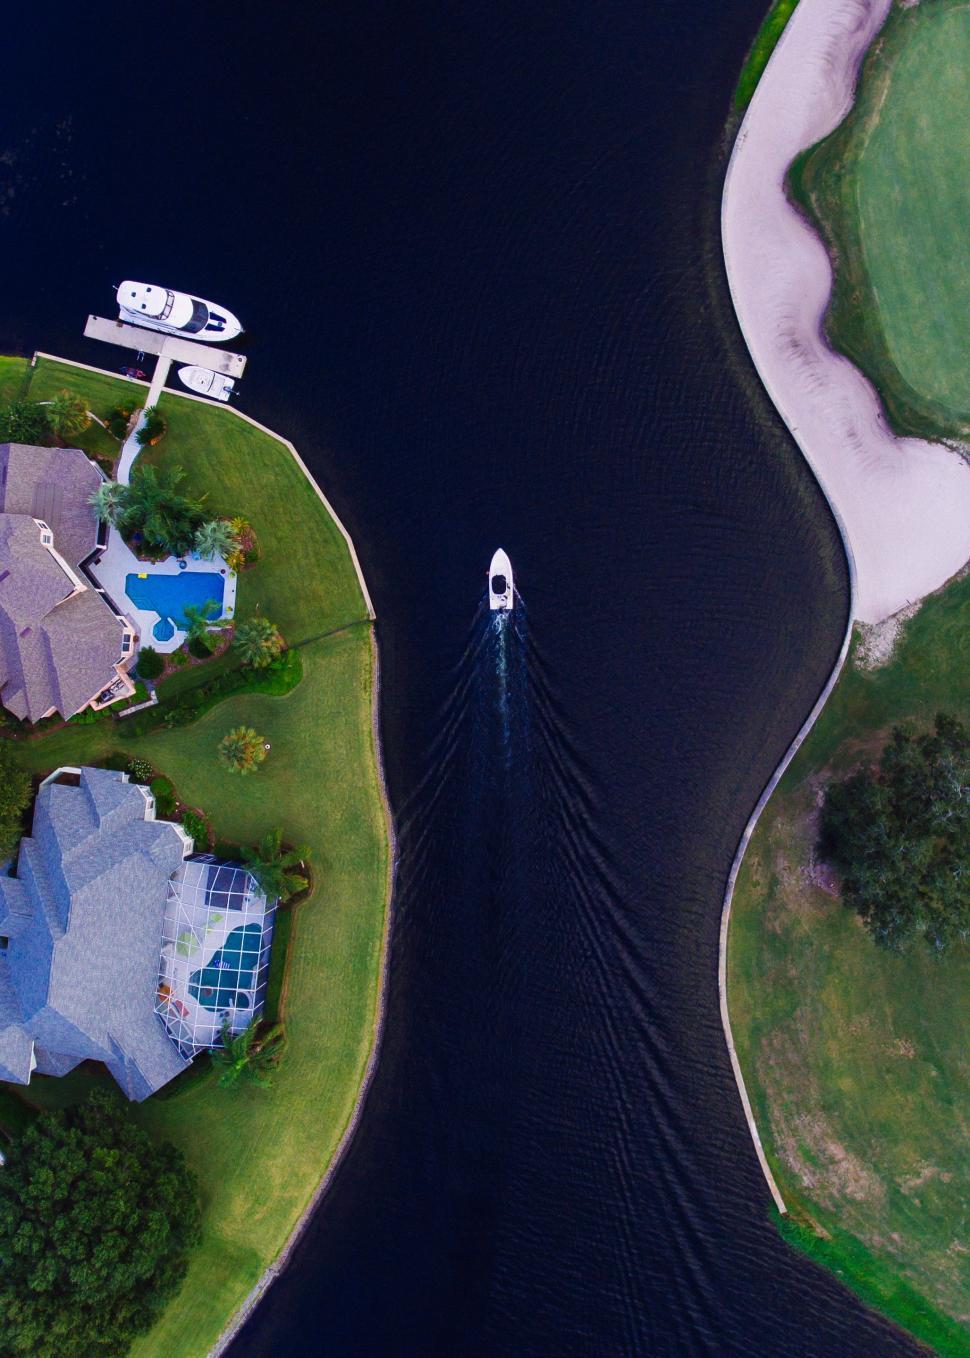 Free Image of Aerial View of House and Boat in Water 